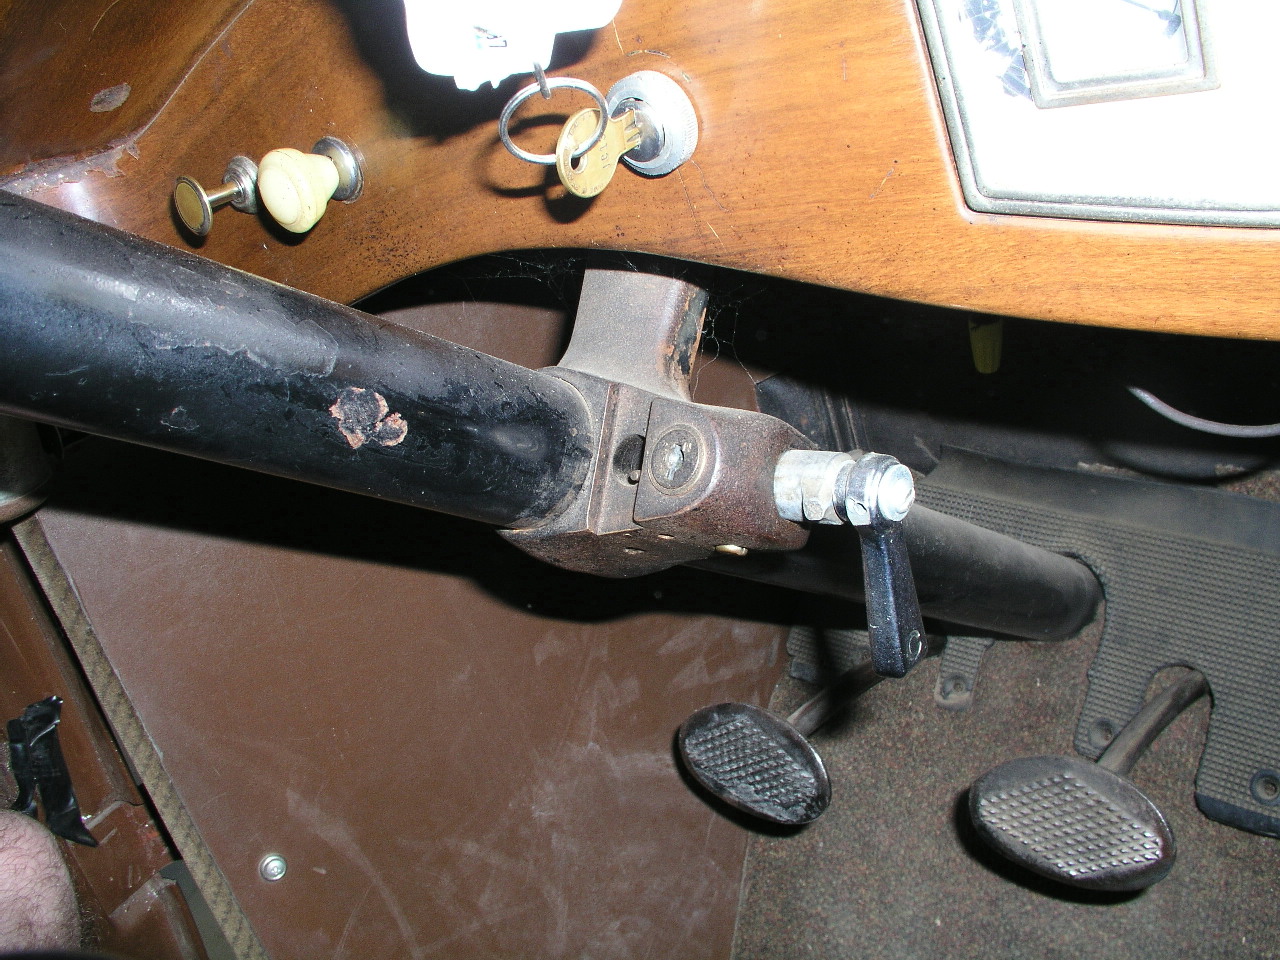 1928 Studebaker Ignition Key Cyliinder and Lock Assembly